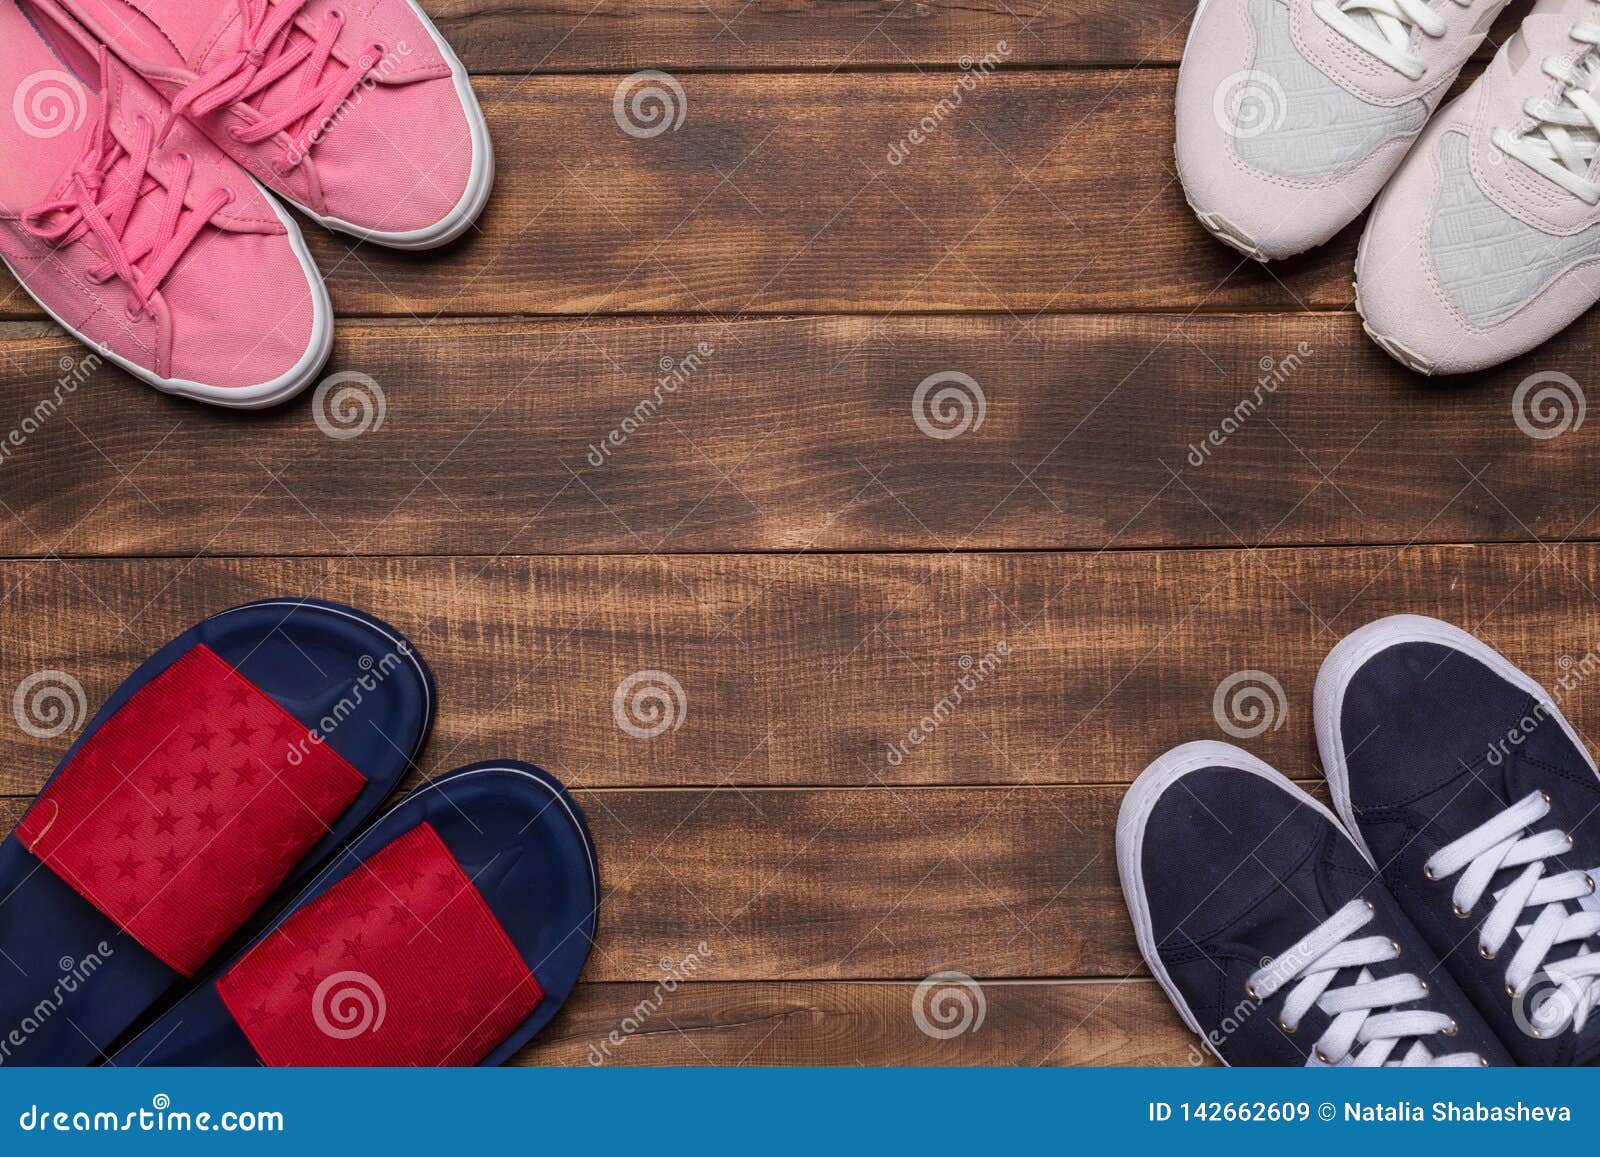 Colorful Shoes Top View. Set of Different Sneakers on Wooden Floor ...